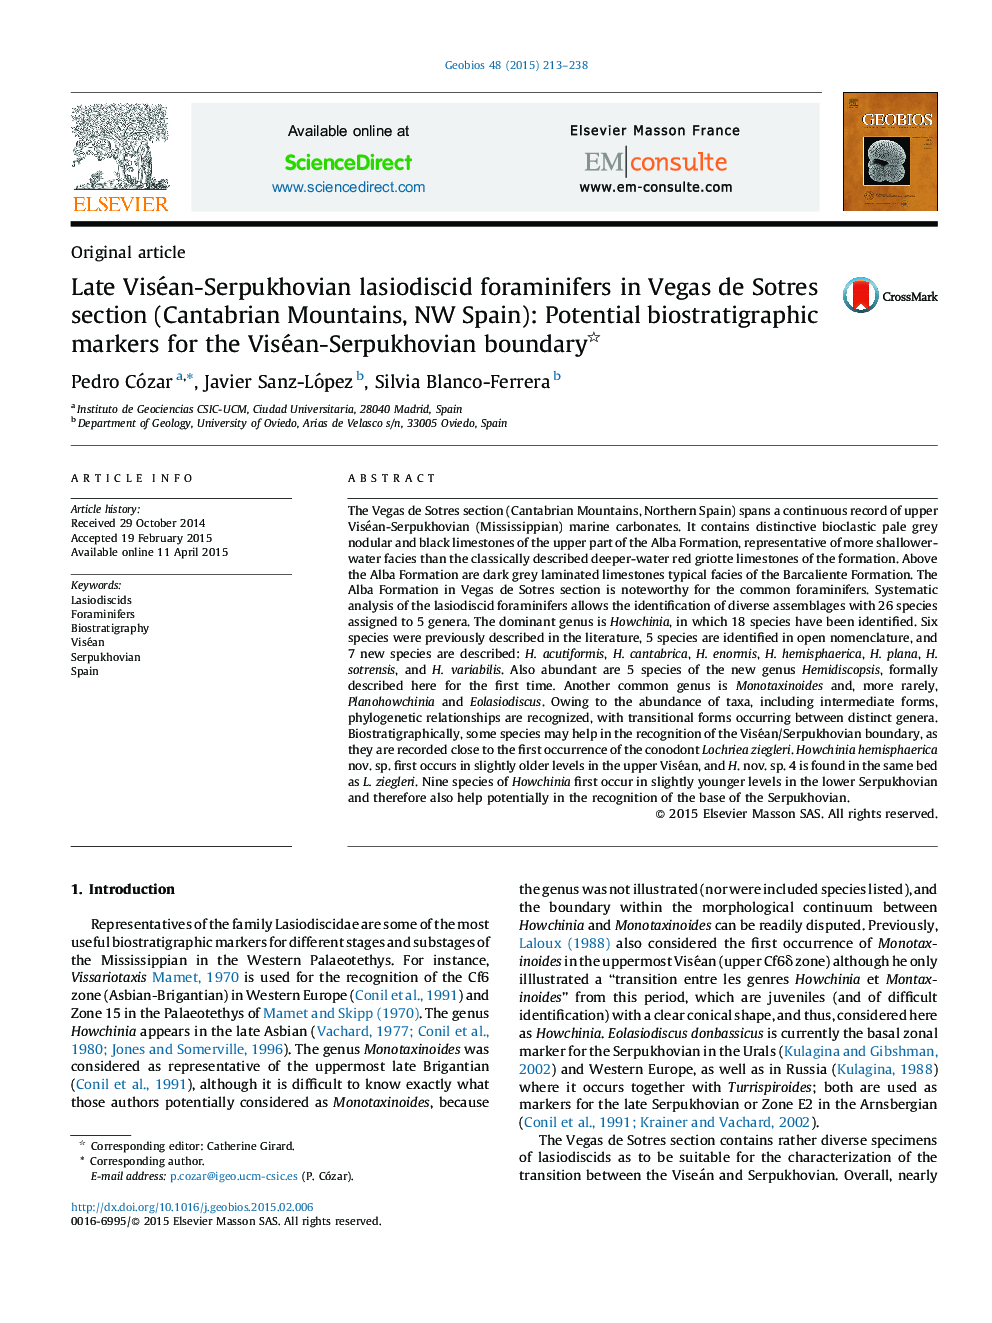 Late Viséan-Serpukhovian lasiodiscid foraminifers in Vegas de Sotres section (Cantabrian Mountains, NW Spain): Potential biostratigraphic markers for the Viséan-Serpukhovian boundary 